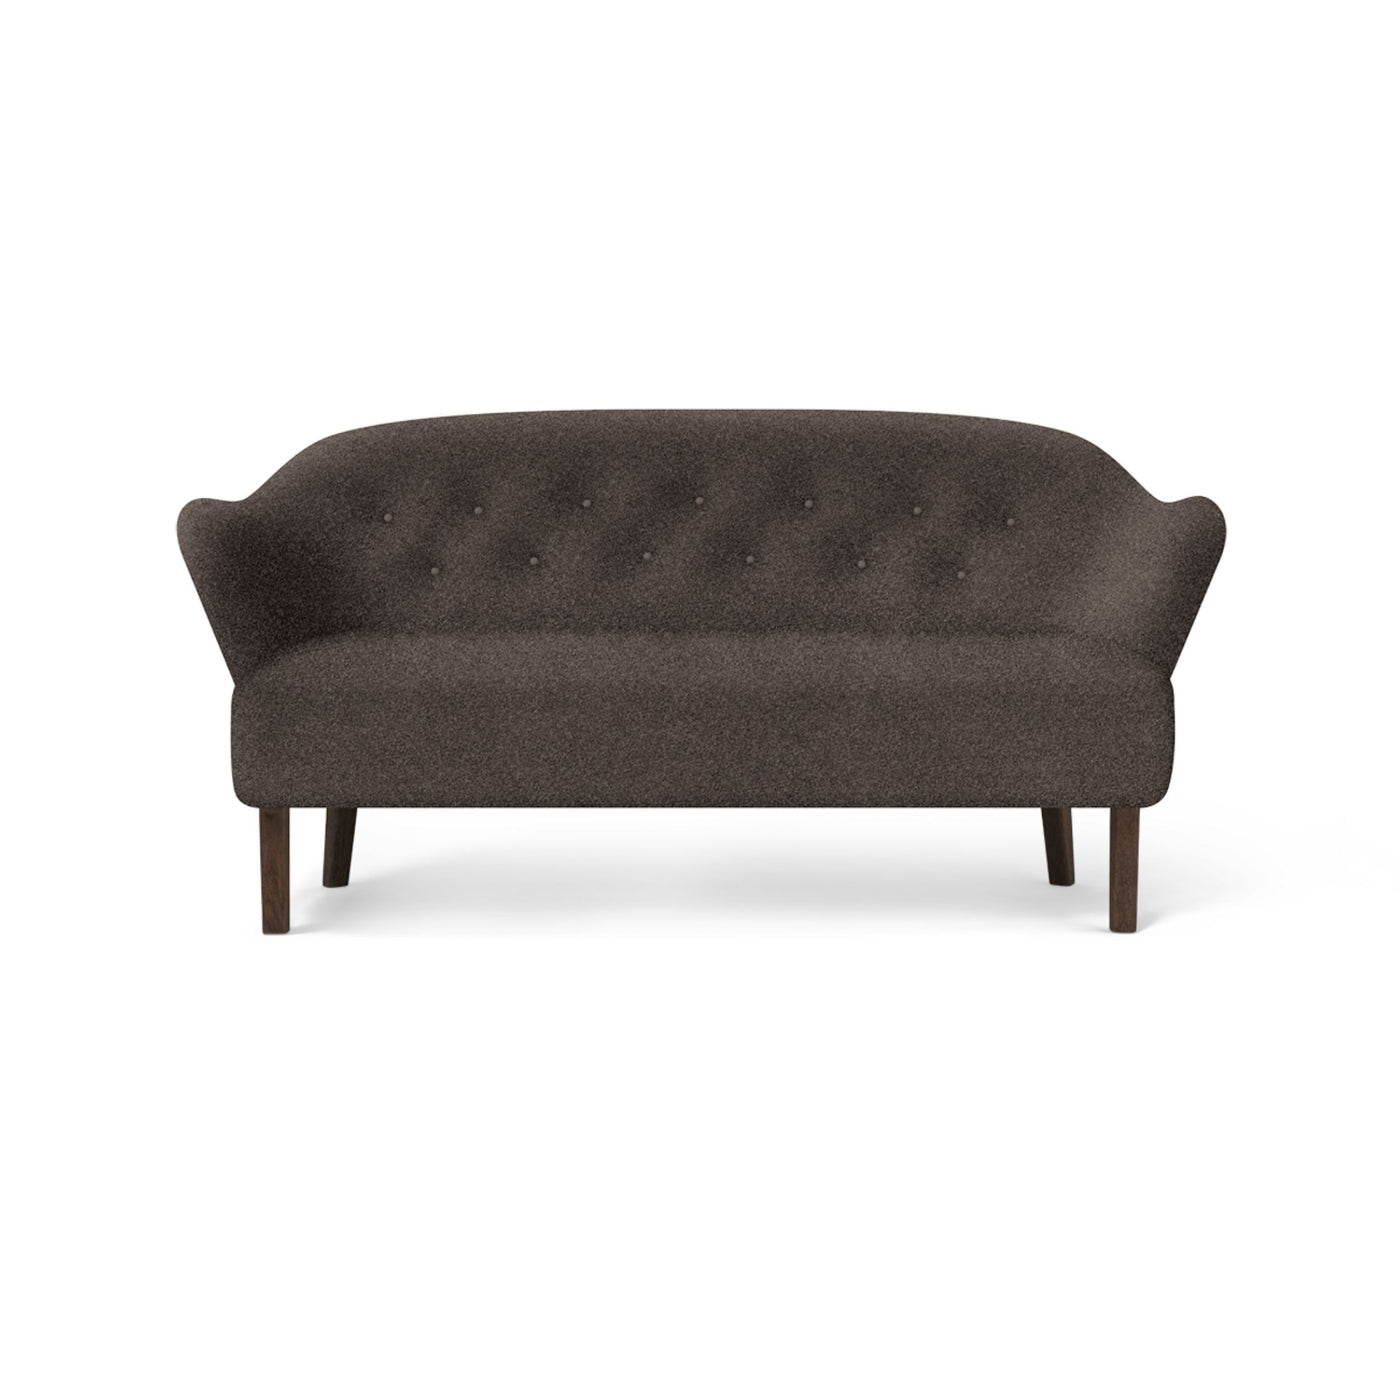 By Lassen Ingeborg sofa with smoked oak legs. Made to order from someday designs. #colour_sahco-nara-3